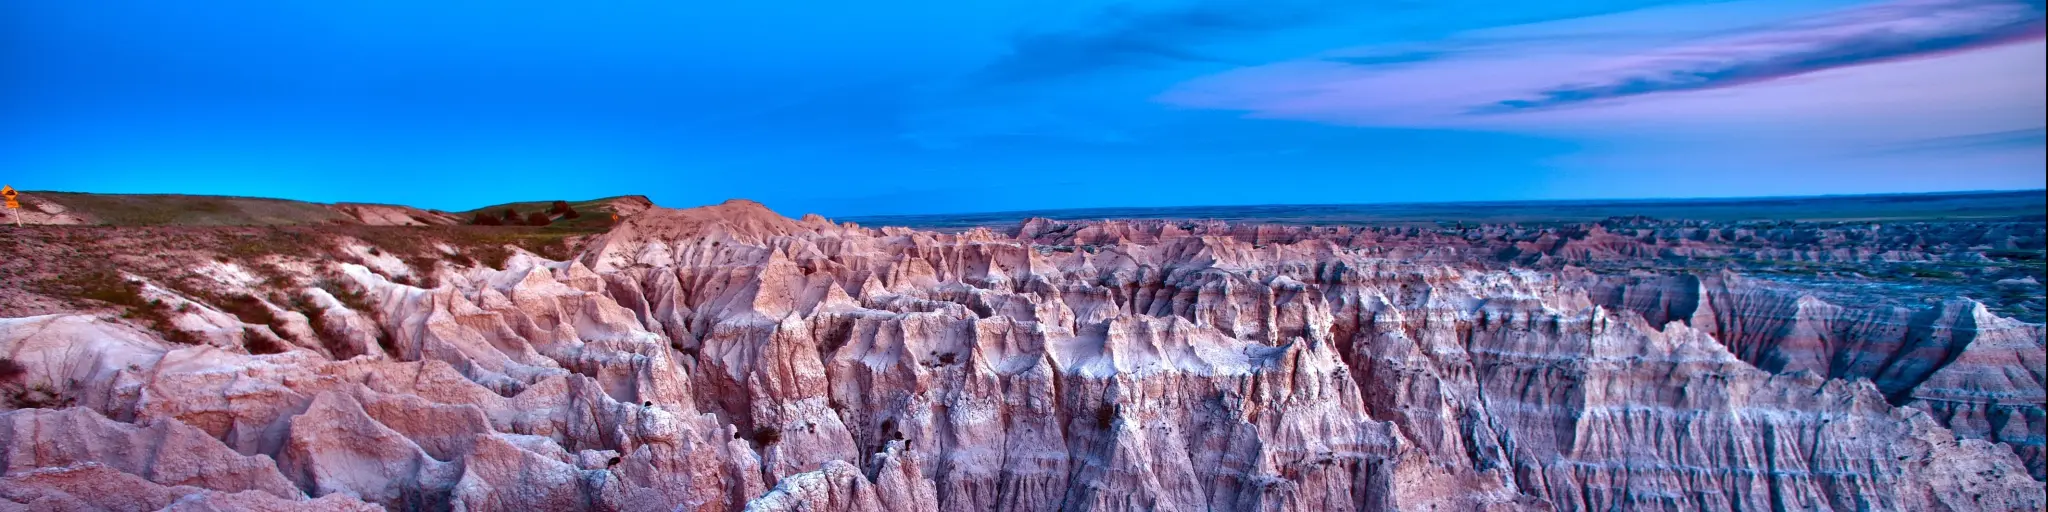 Badlands National Park at dusk with a full moon casting light over the jagged terrain